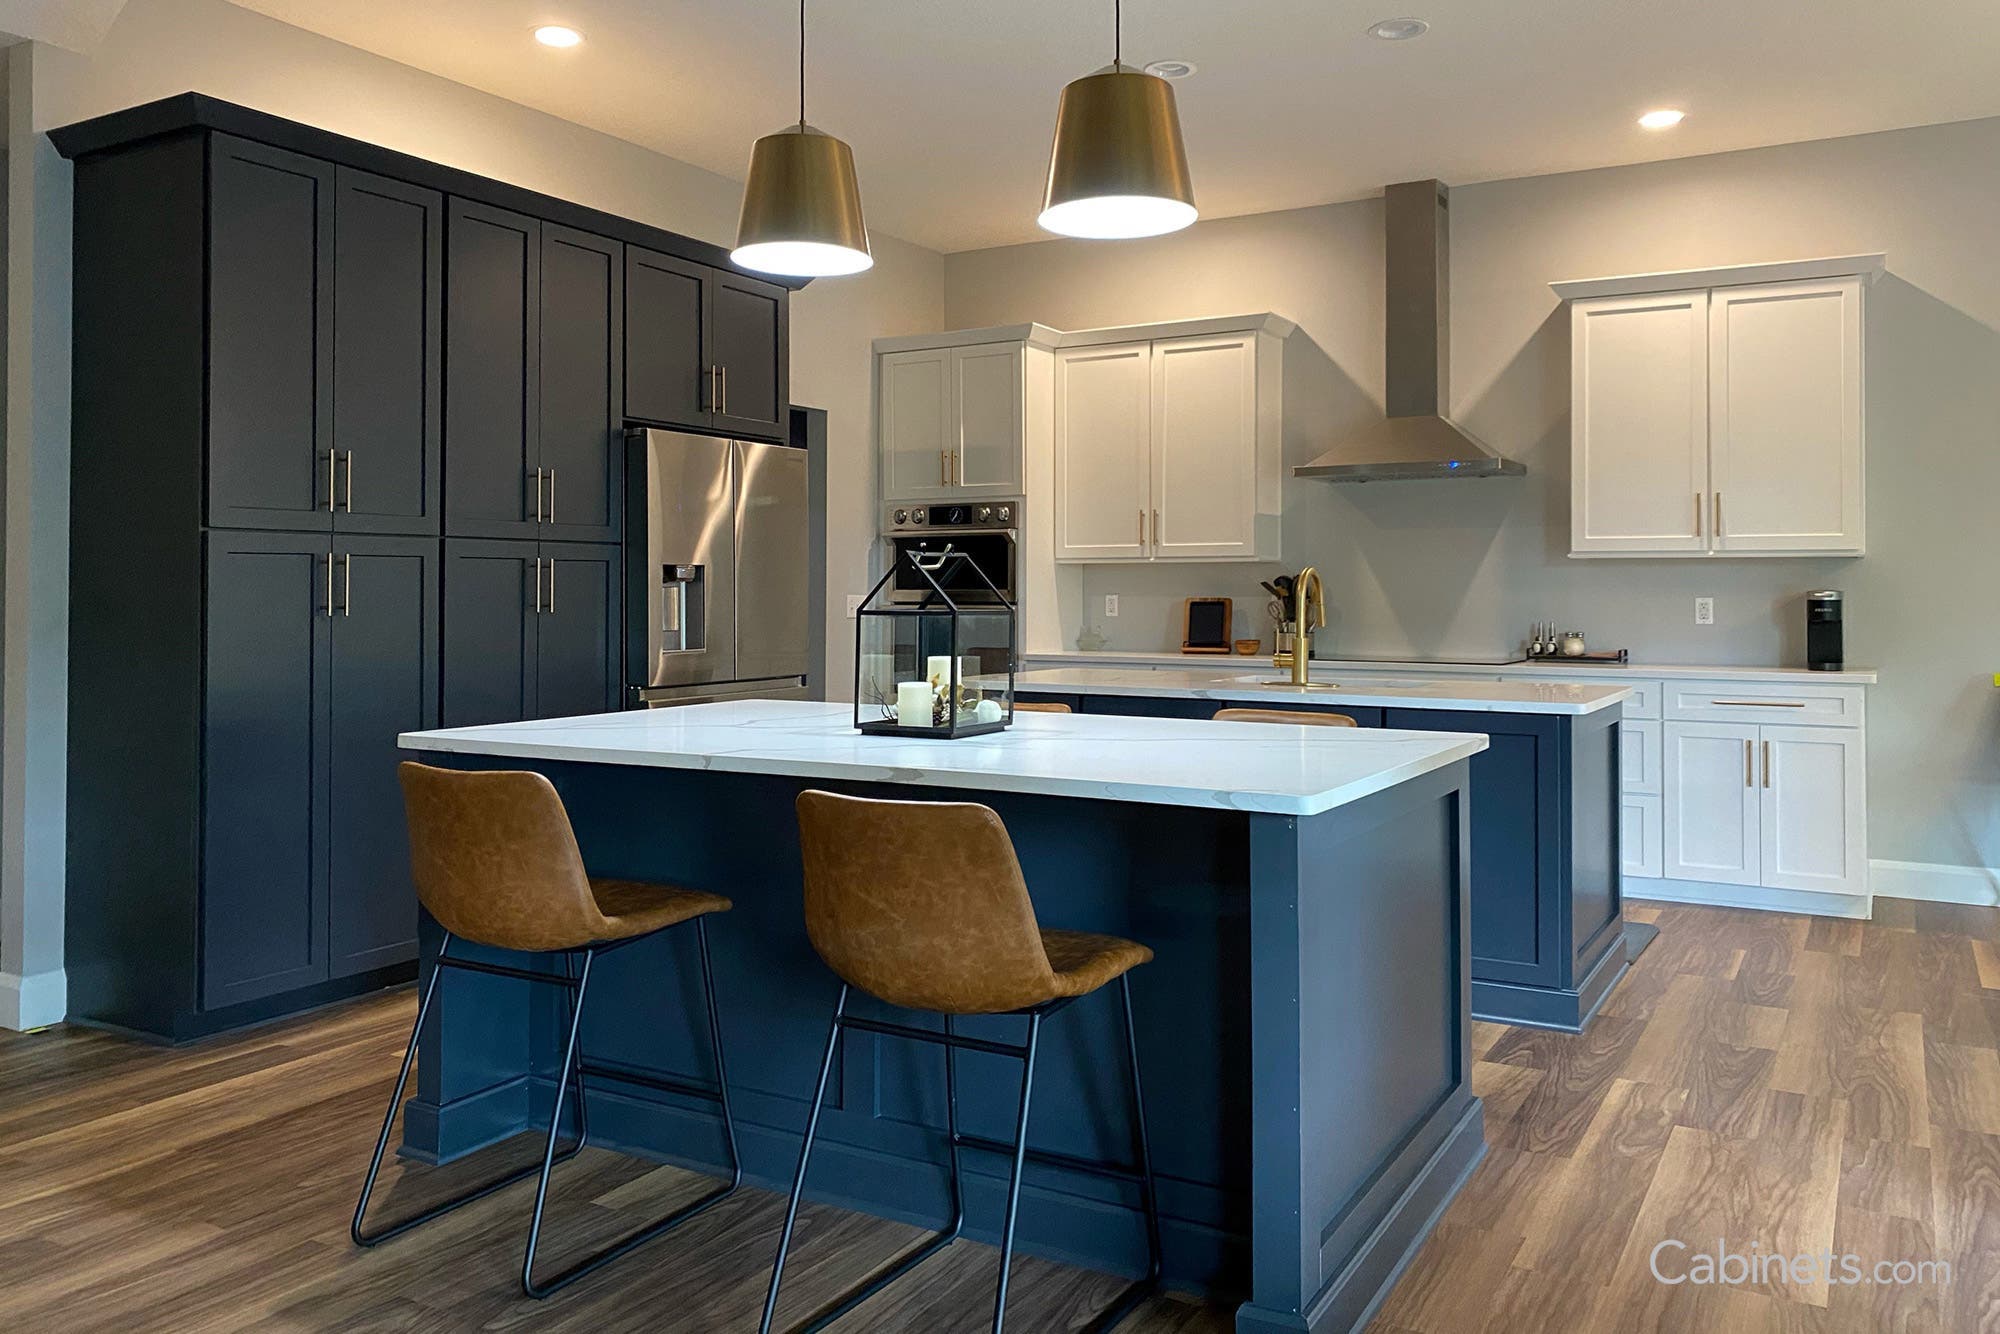 Modern shaker style kitchen with double islands in Midnight and Bright White finishes.